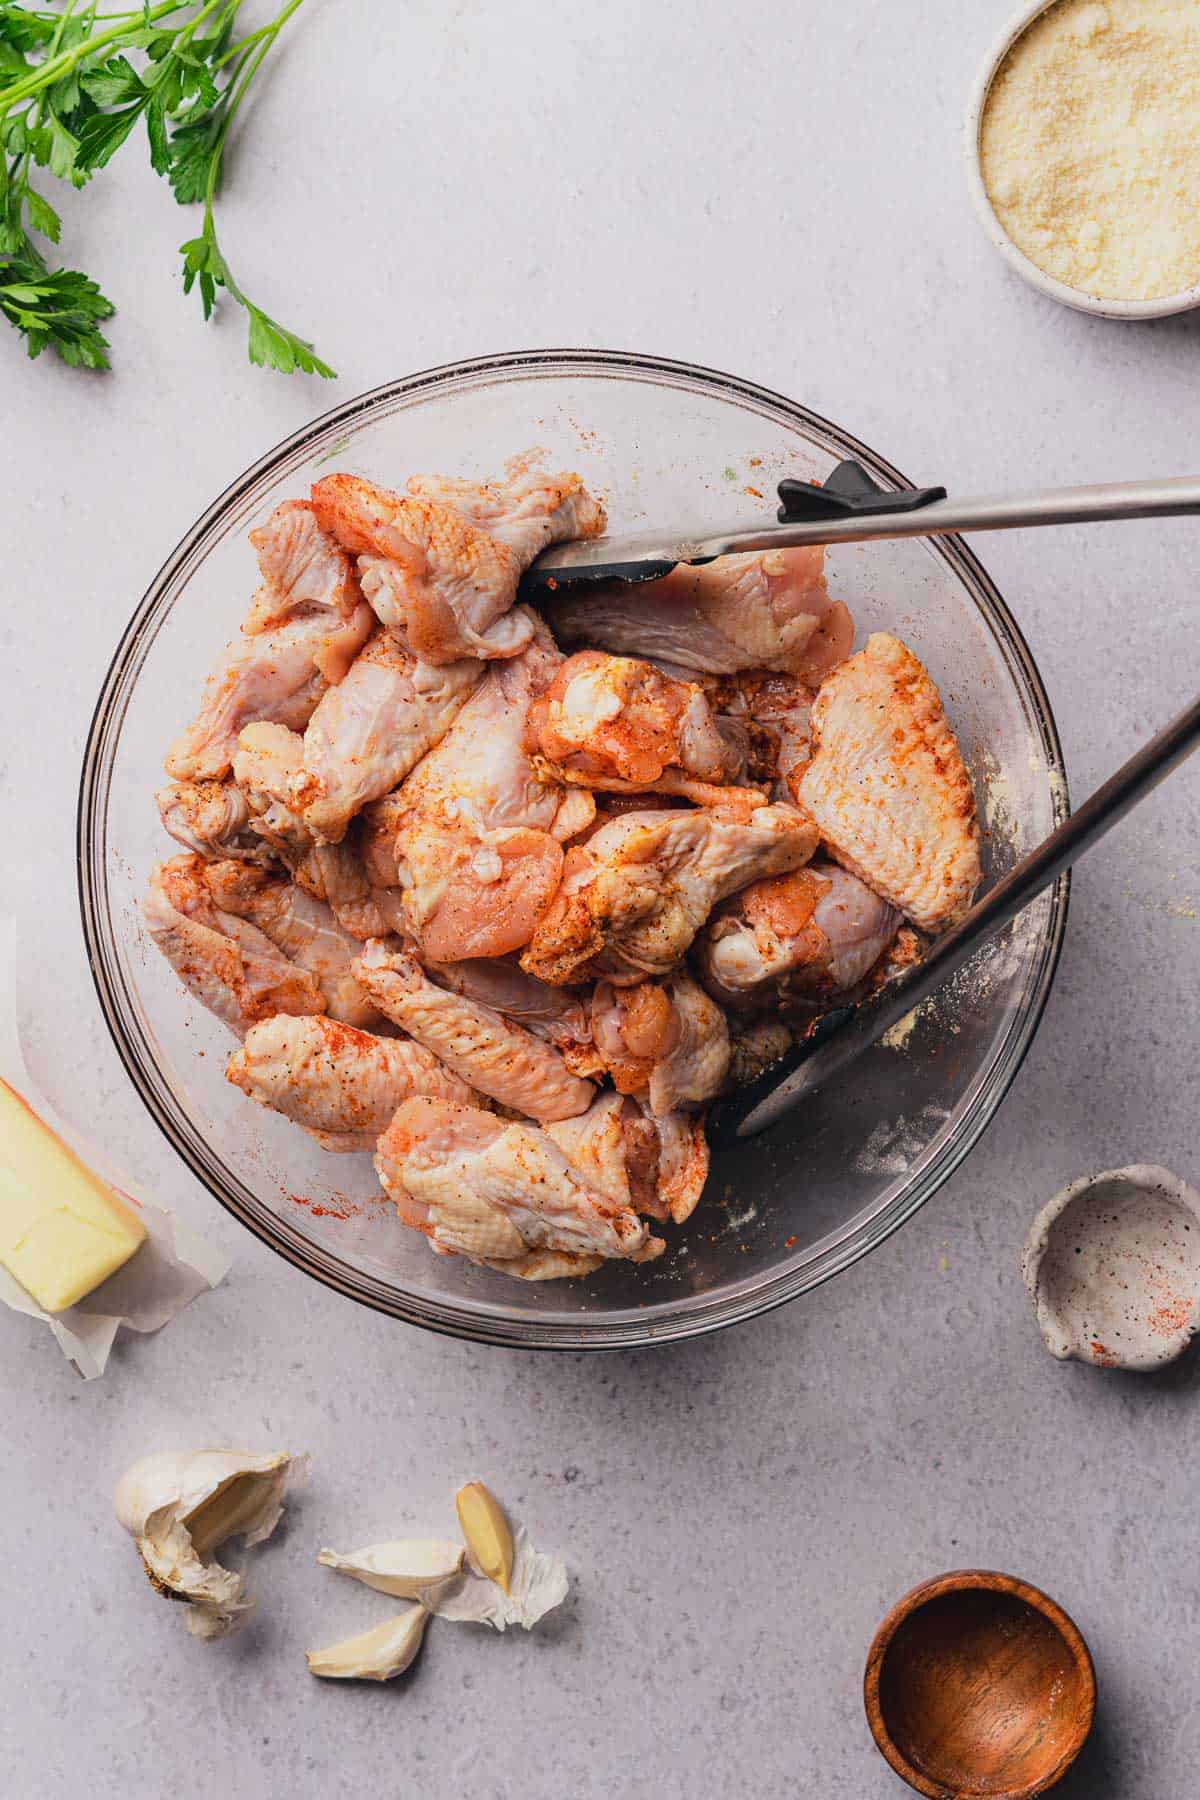 tongs in a bowl of raw chicken wings to coat with seasonings and toss the mixture